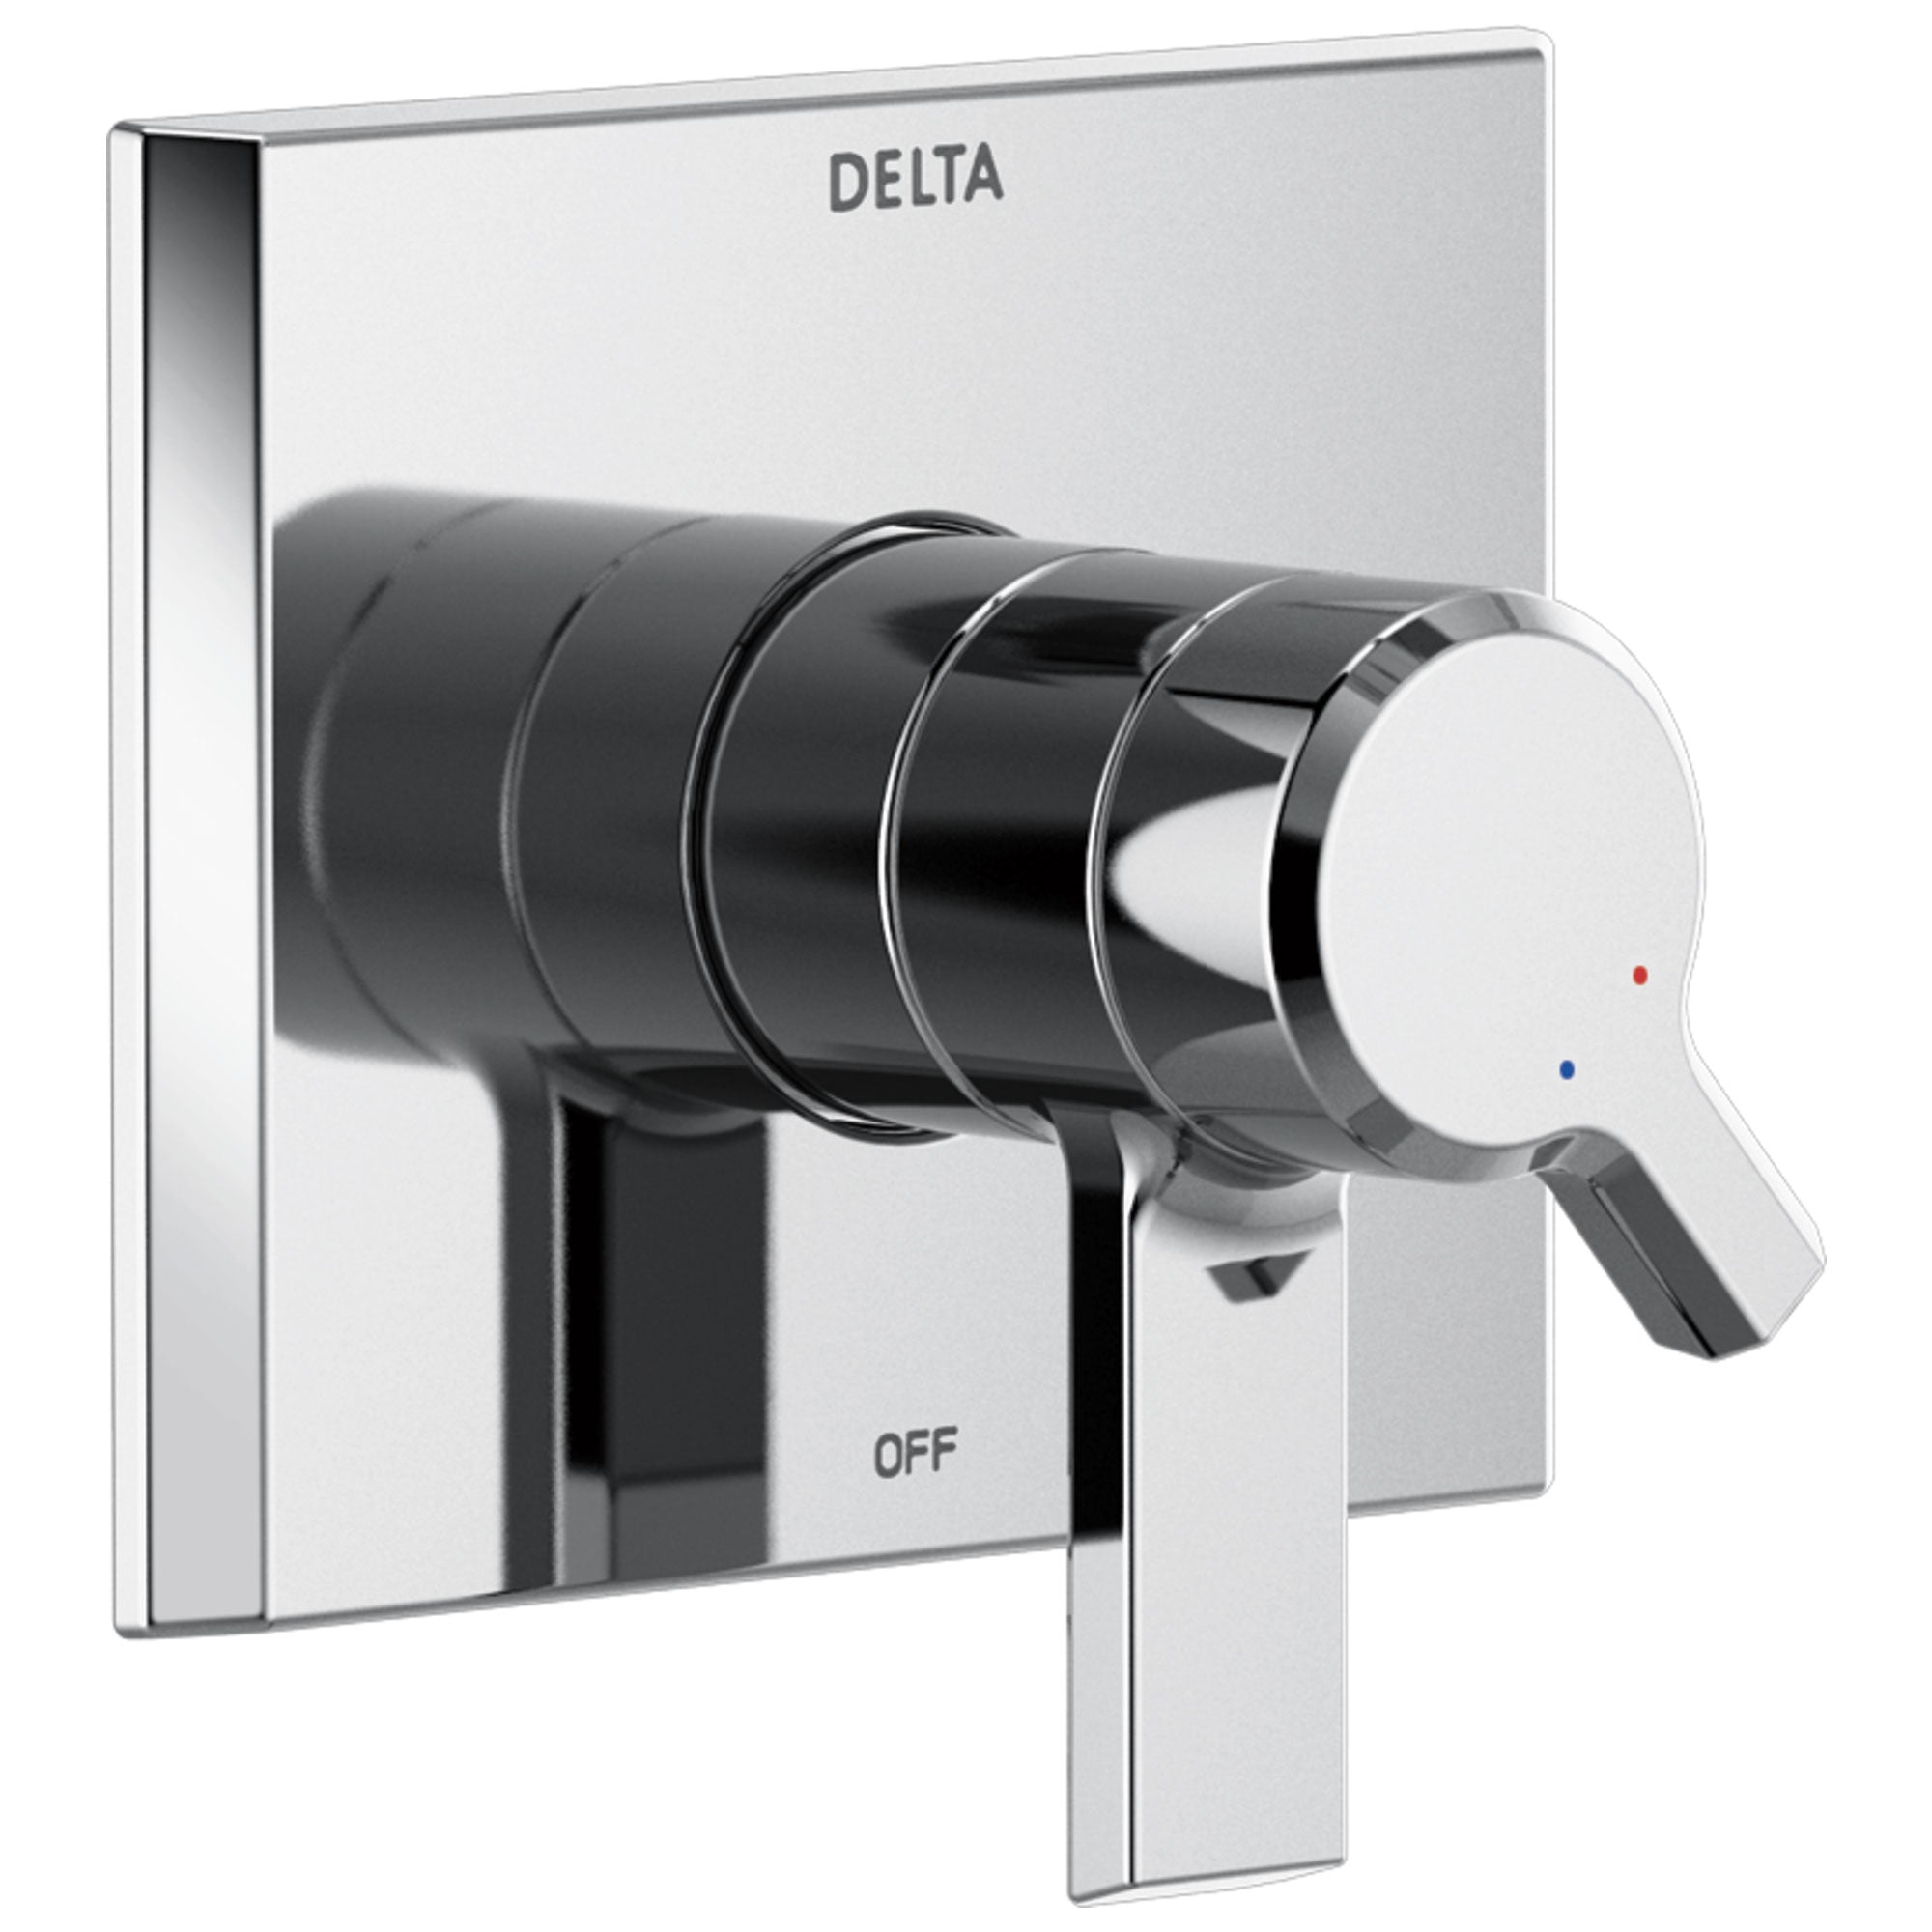 Delta Pivotal Modern Chrome Finish Monitor 17 Series Shower Faucet Control Includes Handles, Cartridge, and Valve with Stops D3398V